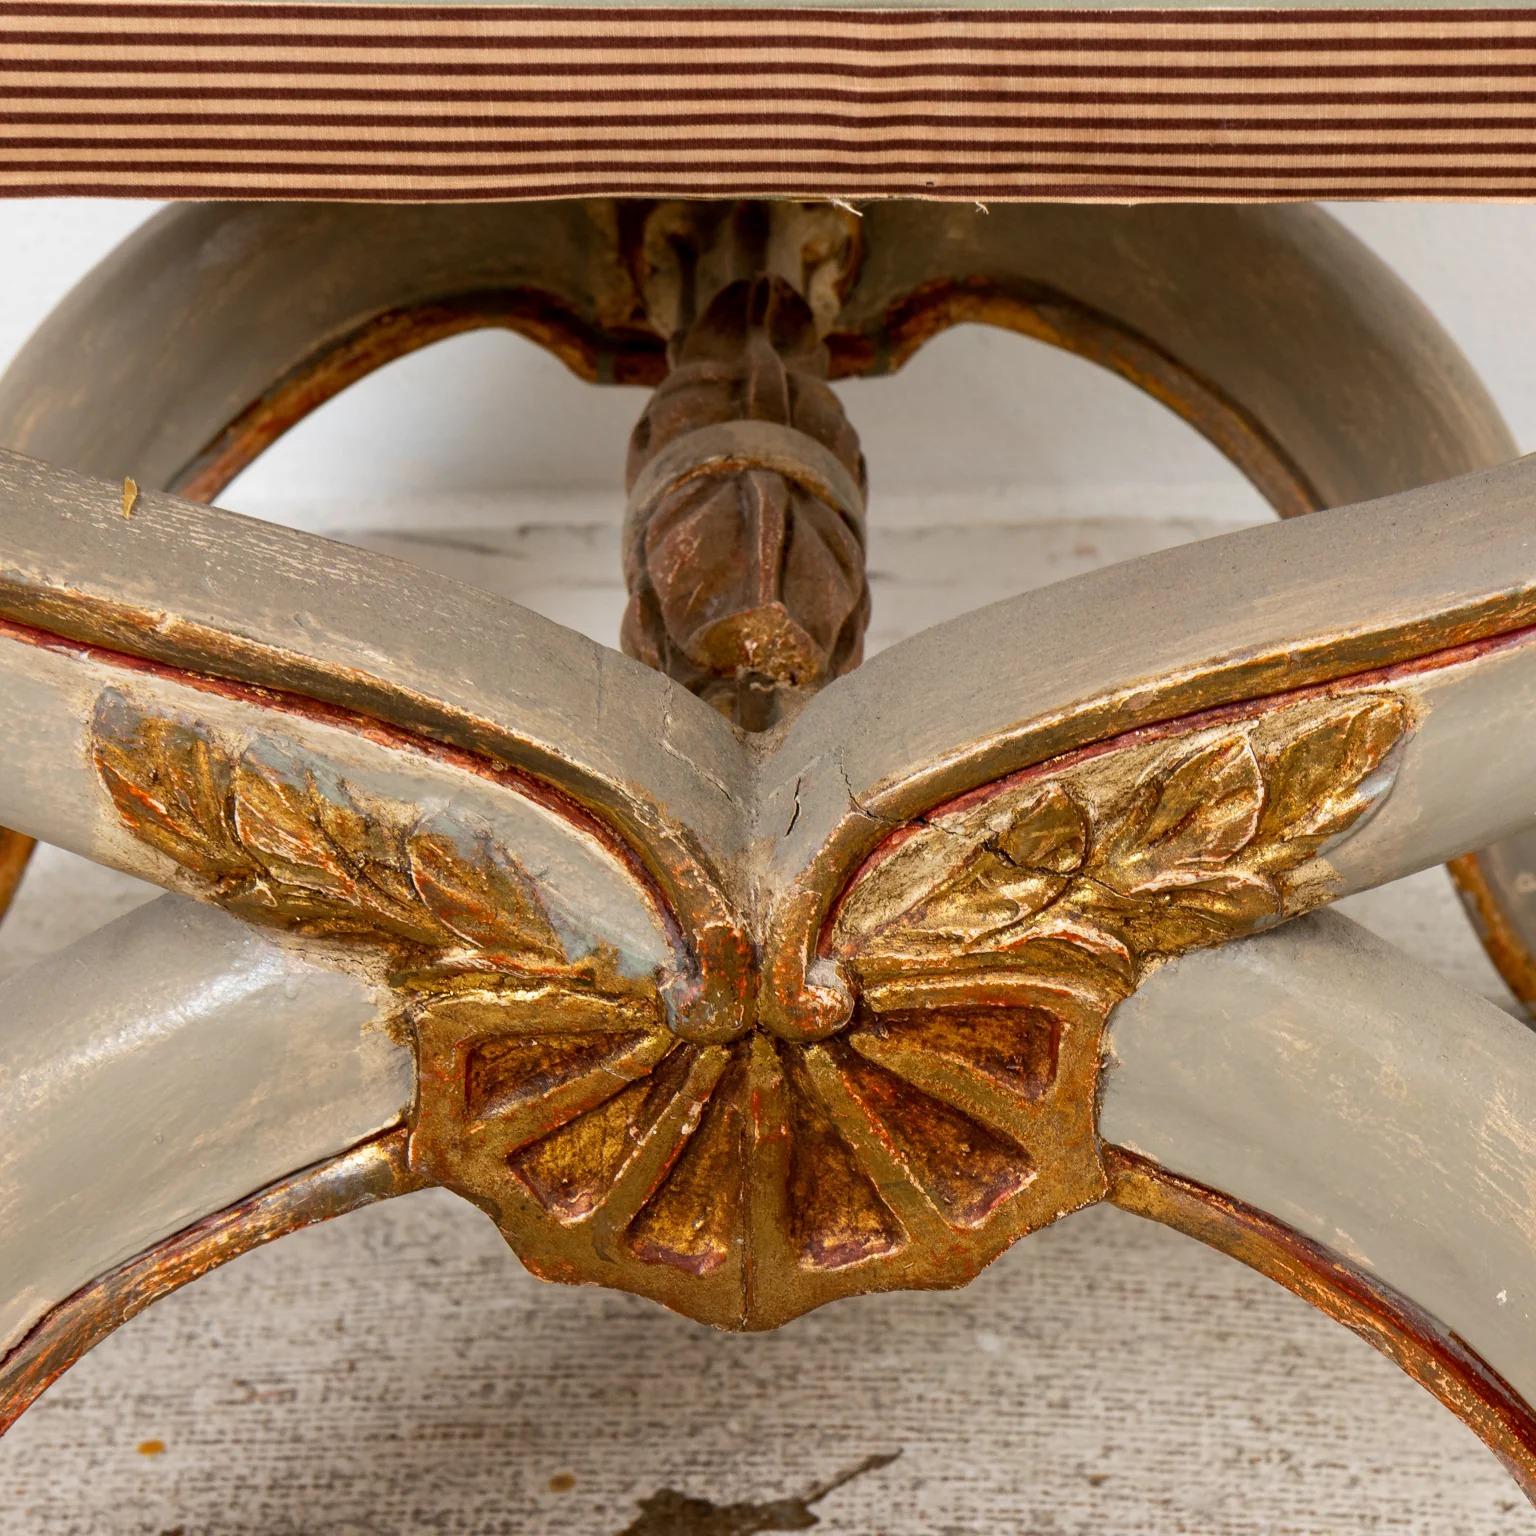 Paint and gilt decorated Italian neoclassical bench with silk upholstery and x form base. Please note of wear consistent with age.